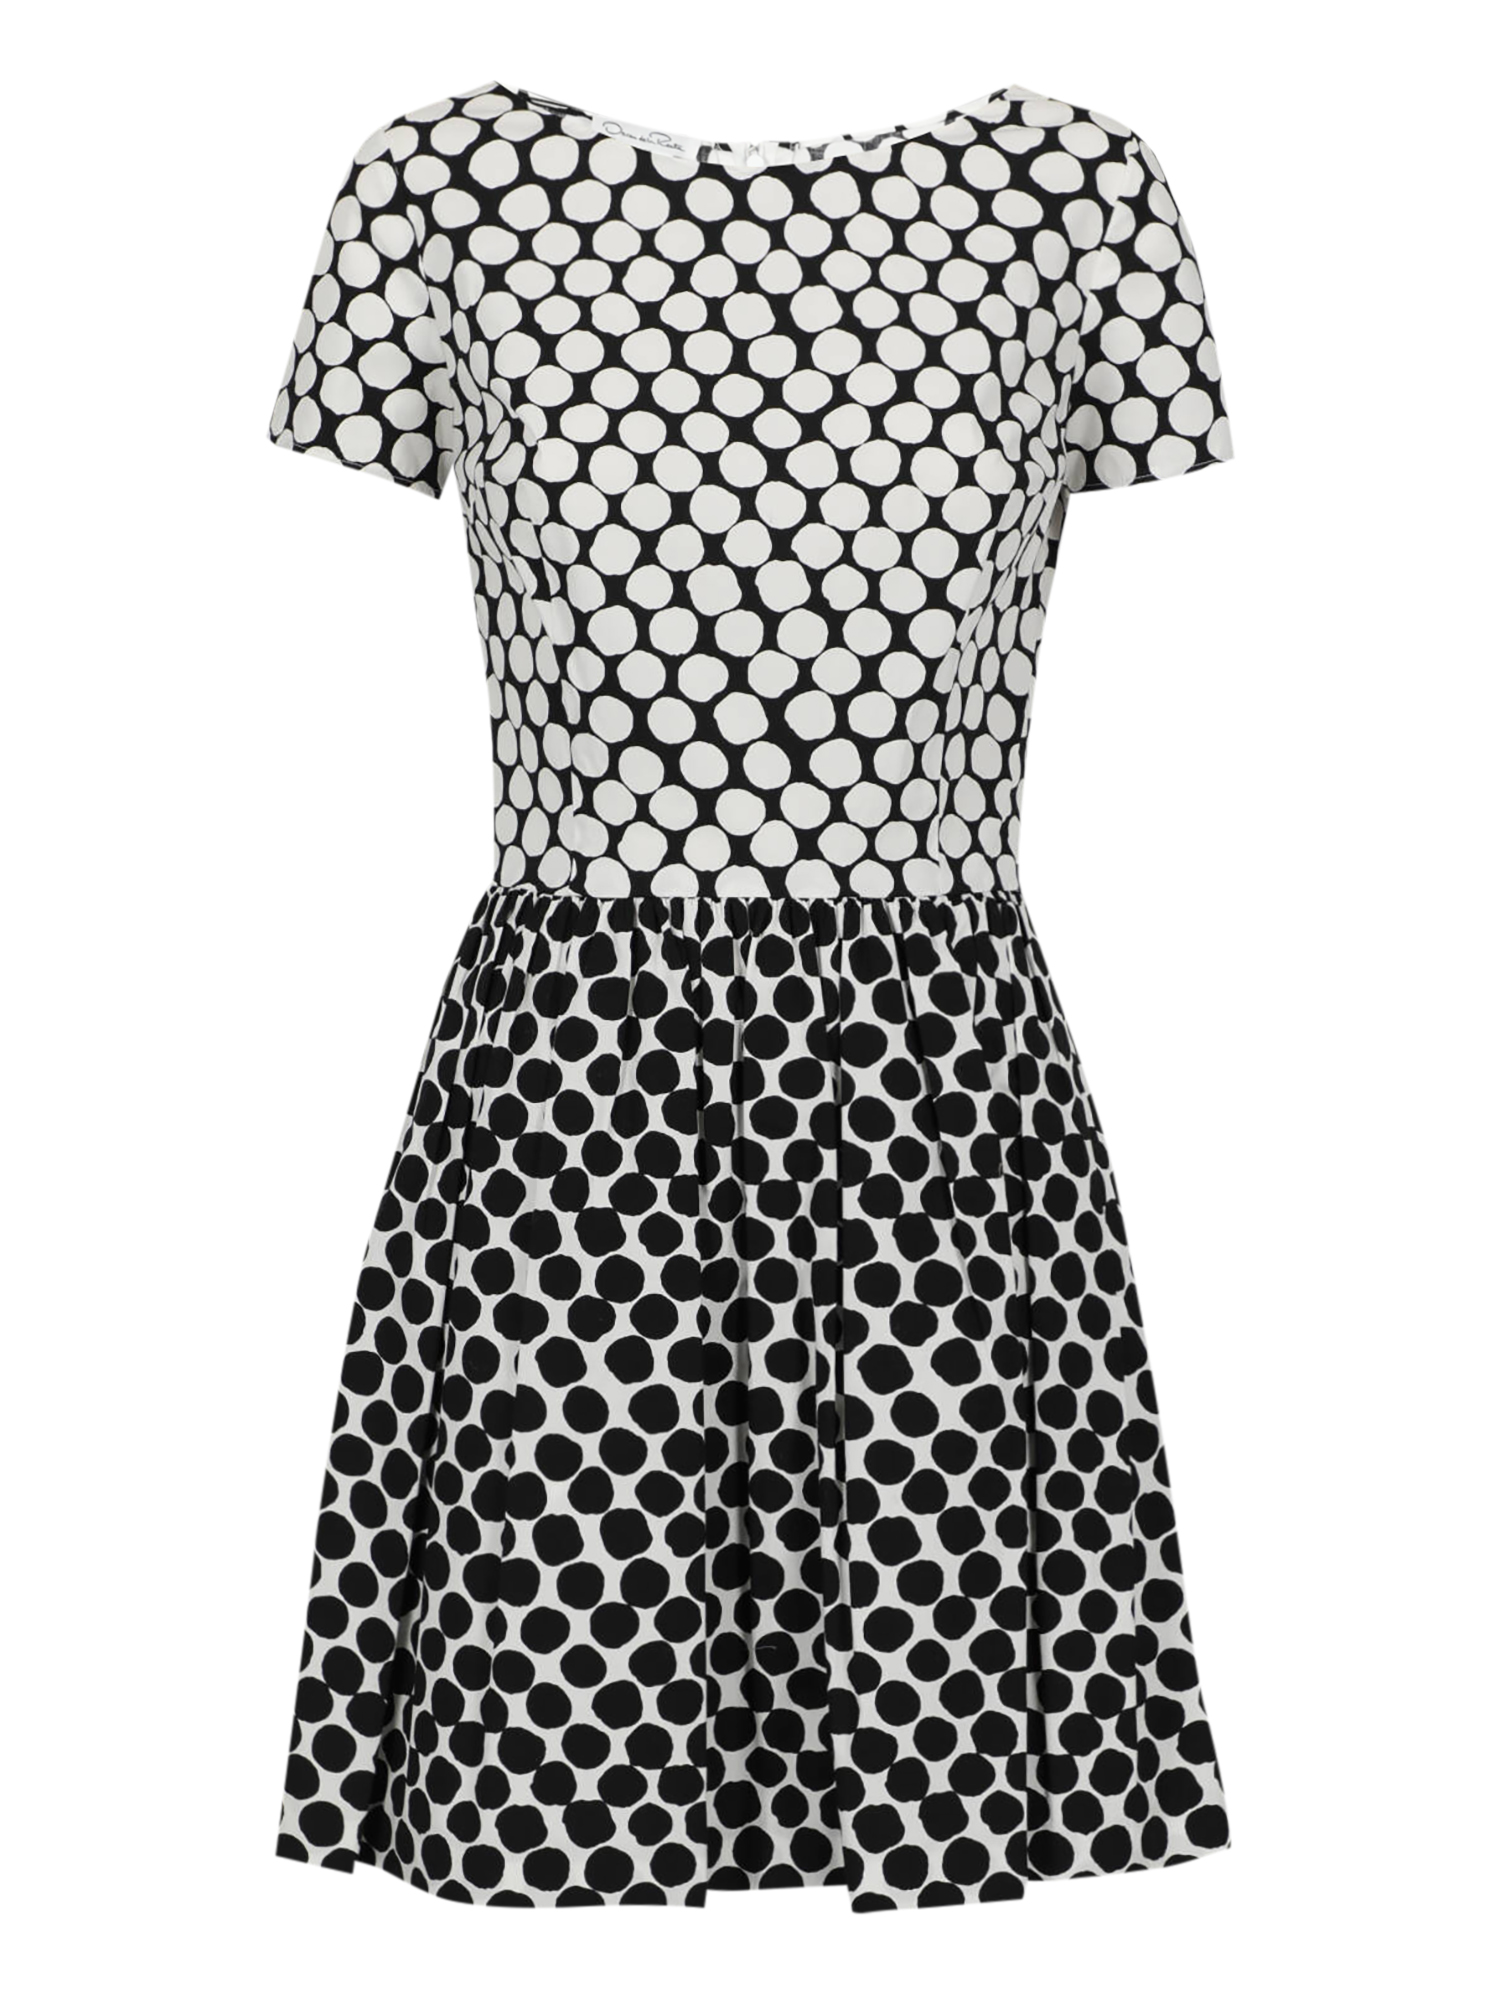 Condition: New With Tag, Polka Dot Cotton, Color: Black, White - S - US 4 -